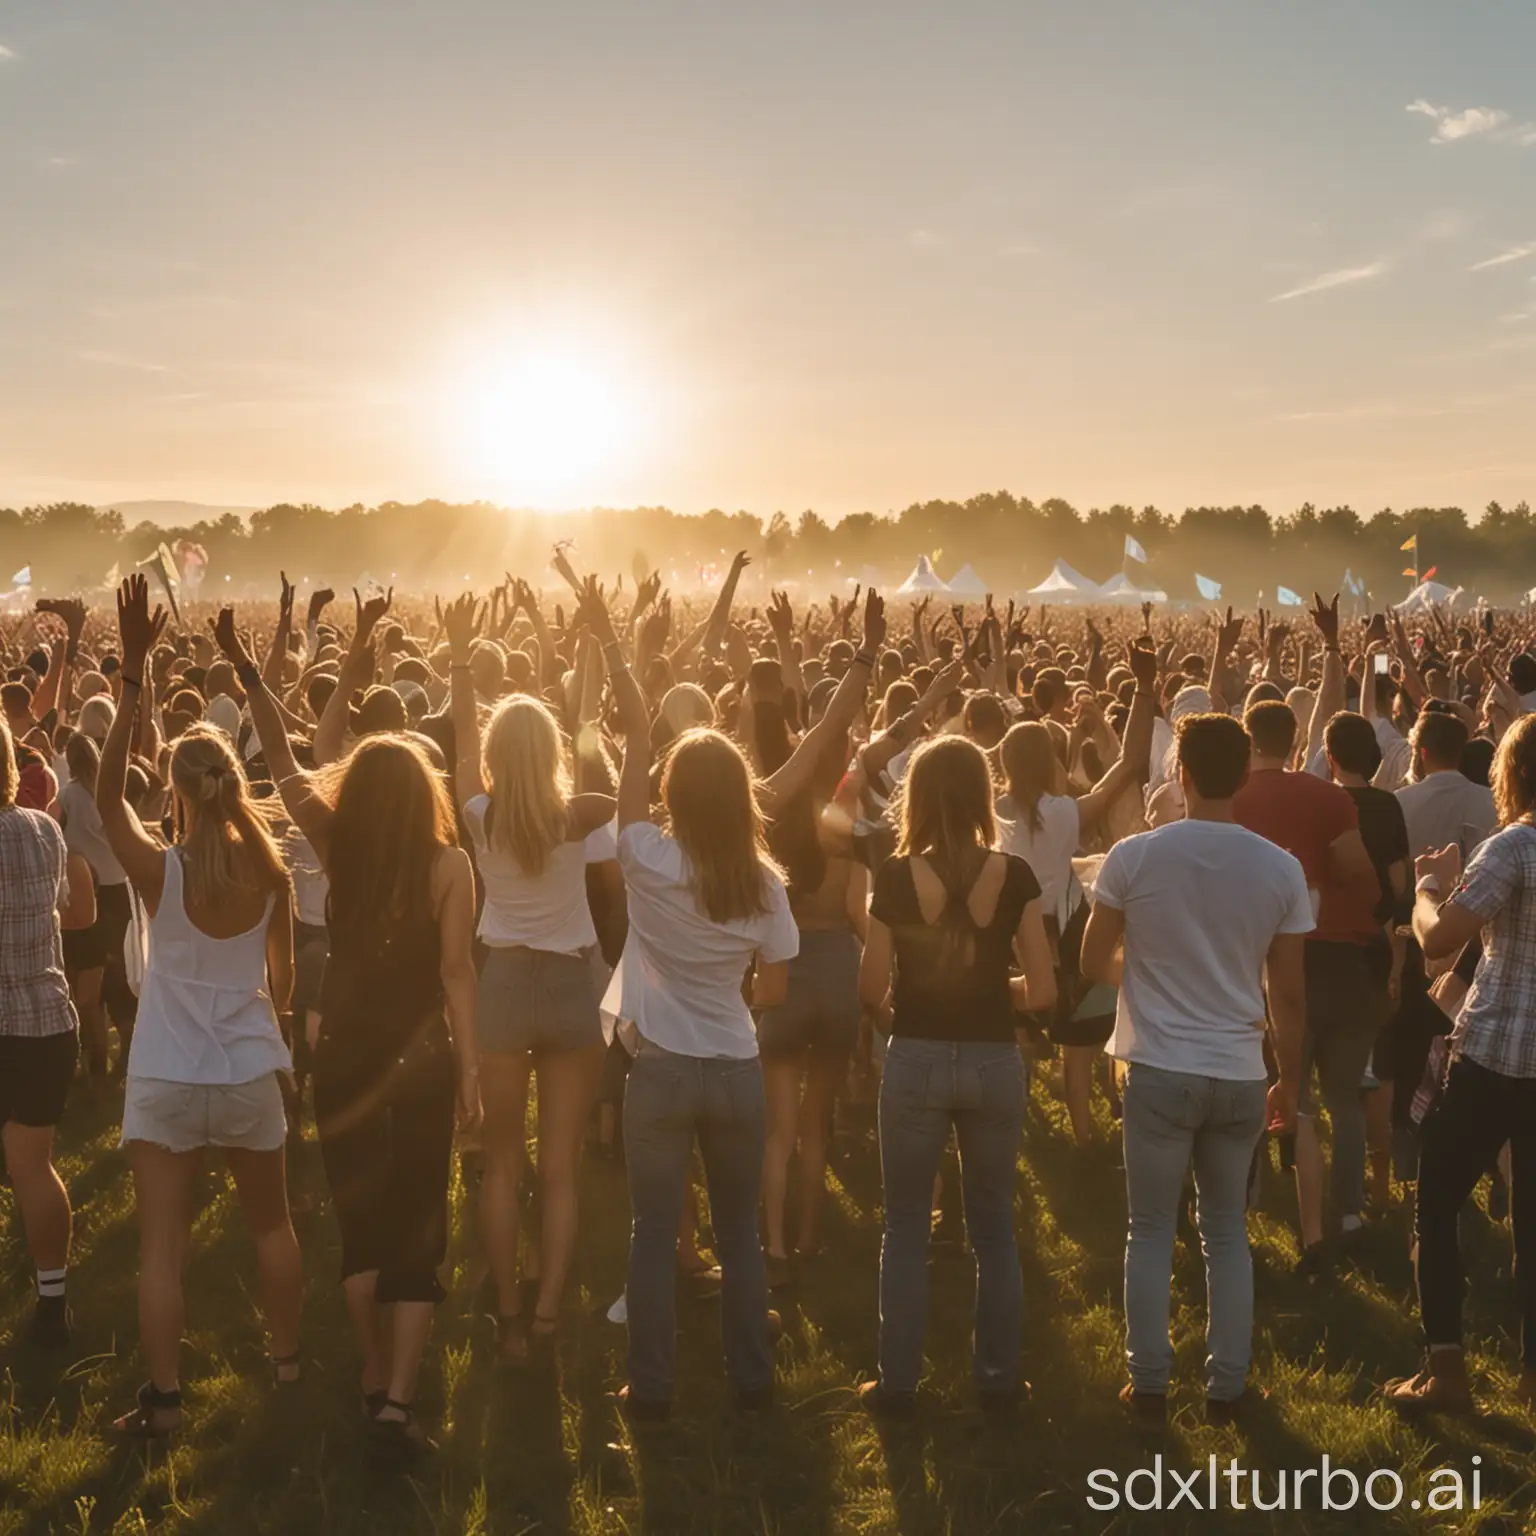 Vibrant-Music-Festival-Crowd-Dancing-under-Sunny-Skies